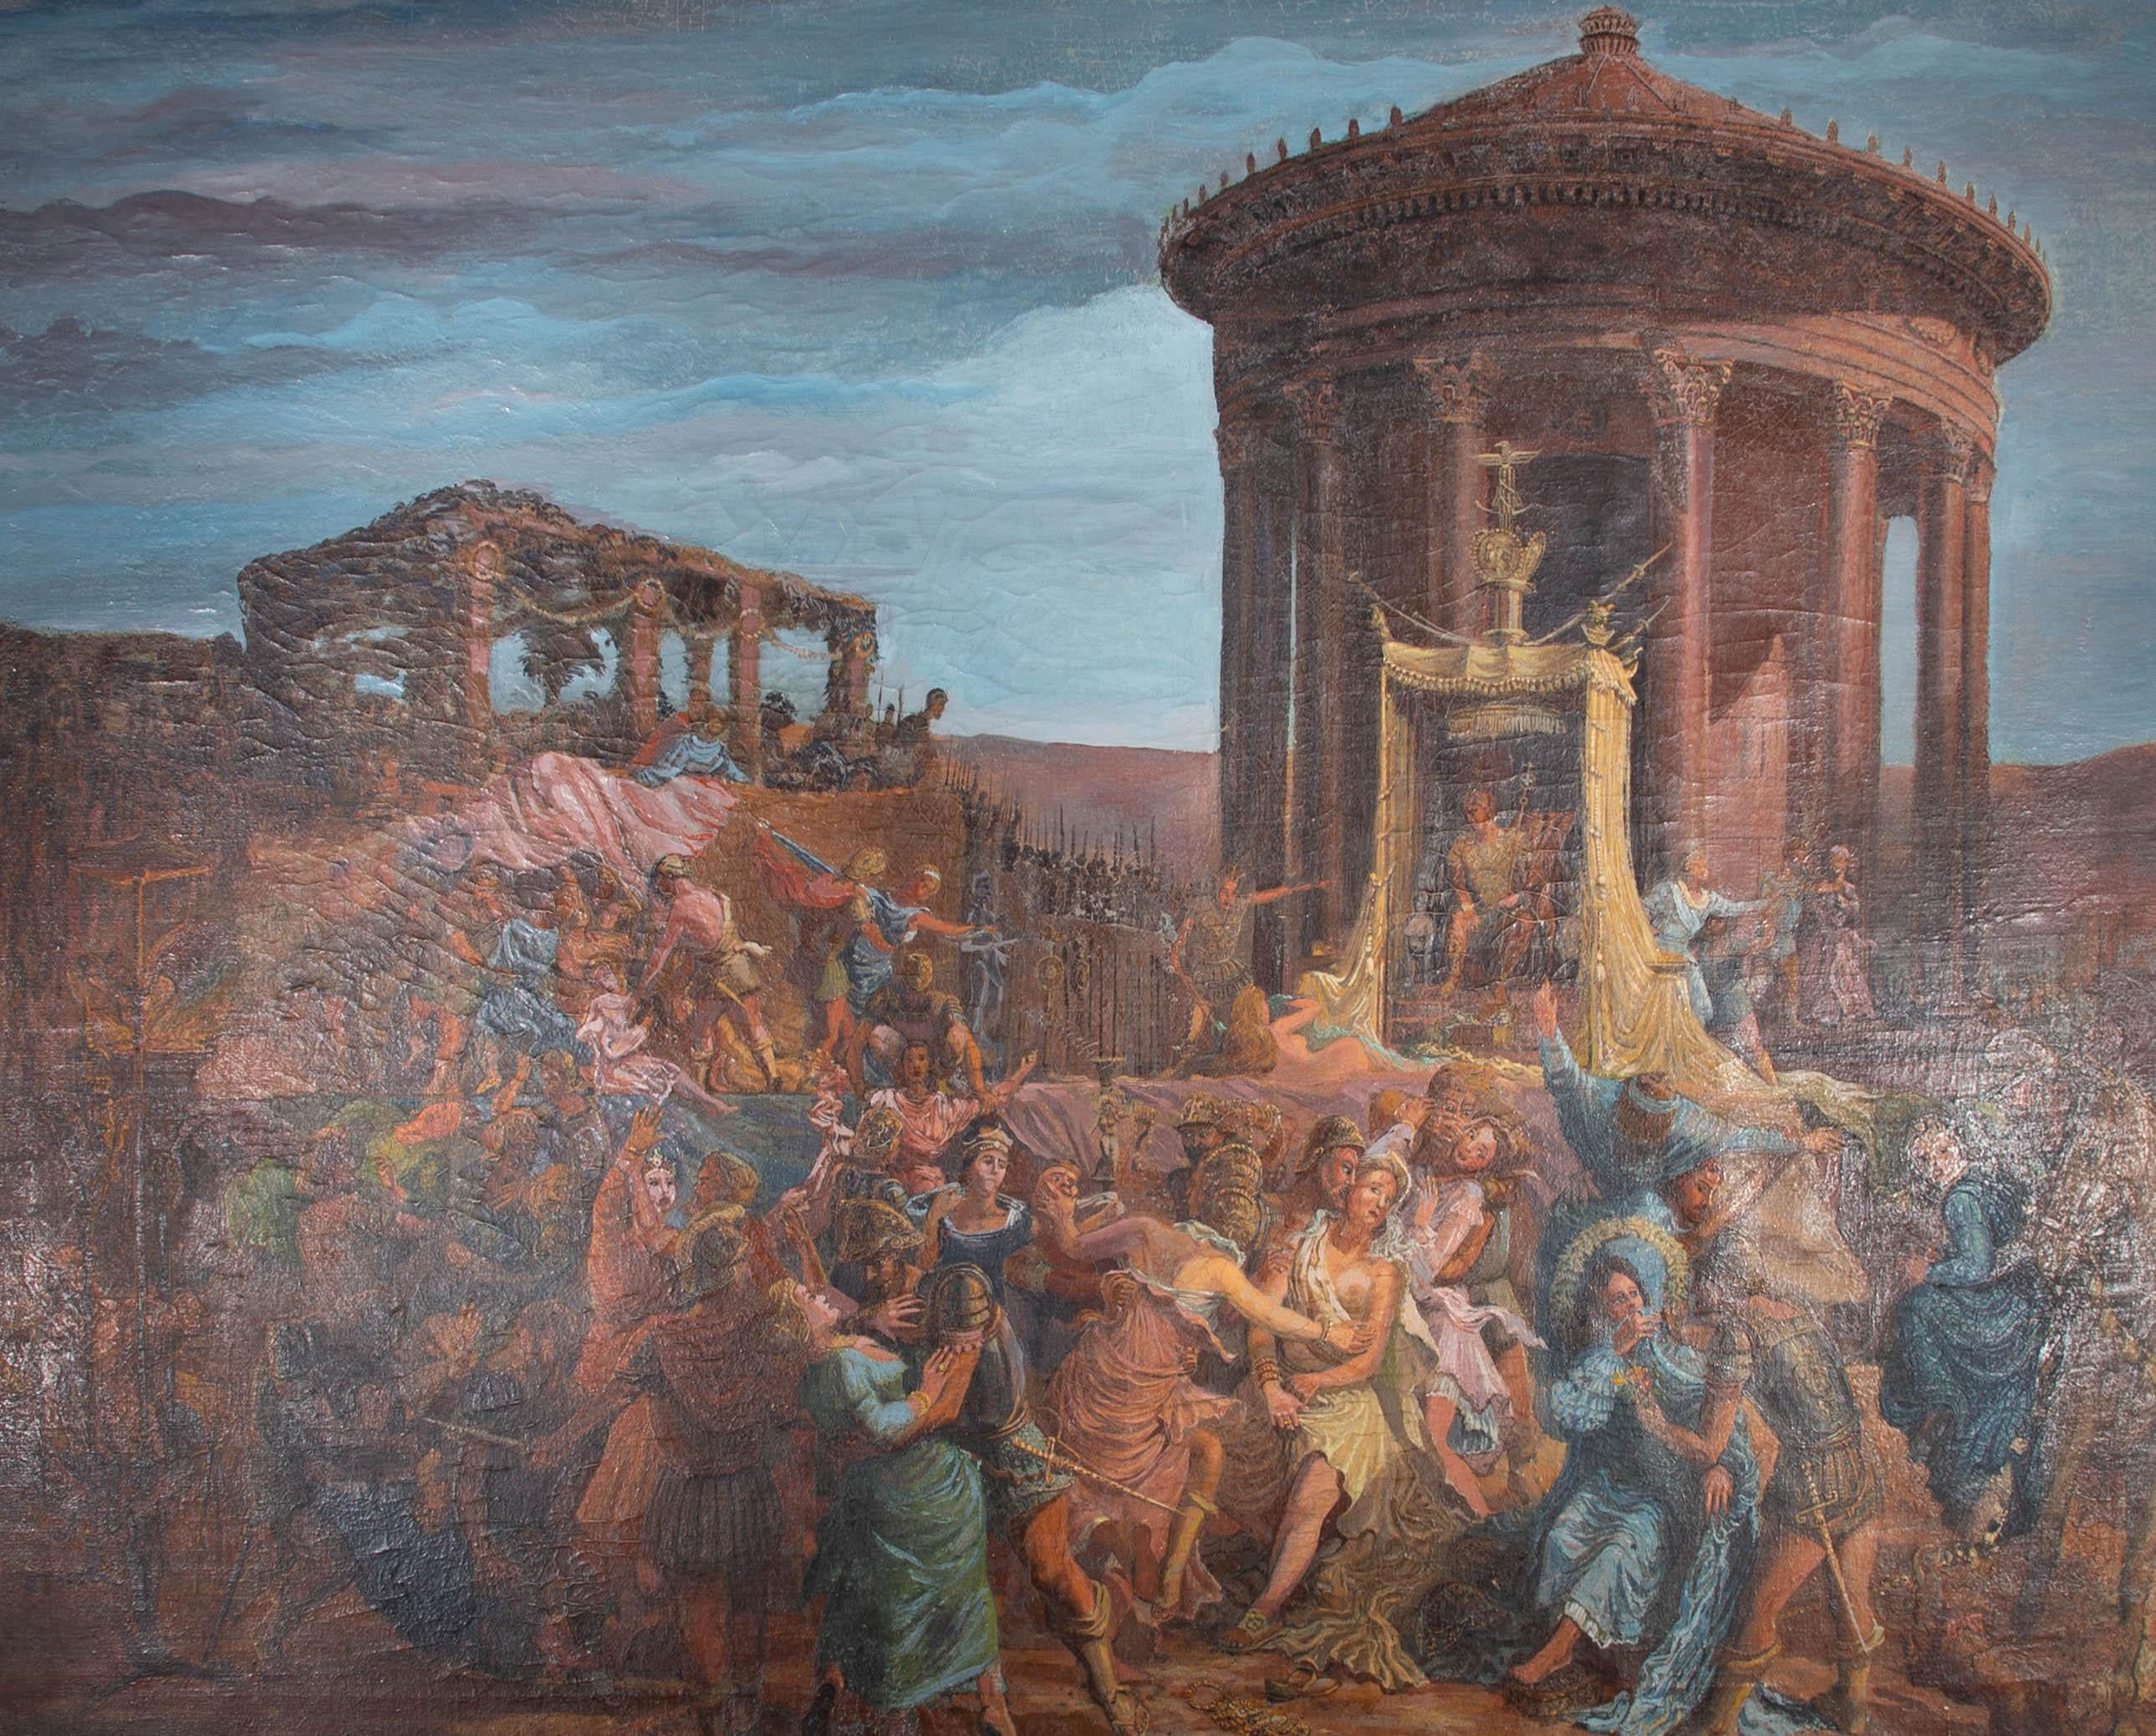 This striking oil scene depicts The Abduction of the Sabine Women, a tale from ancient Roman history. The accounts of Livy and Plutarch claim that after the city of Rome was founded an elaborate plot was made to steal the woman of the neighbouring